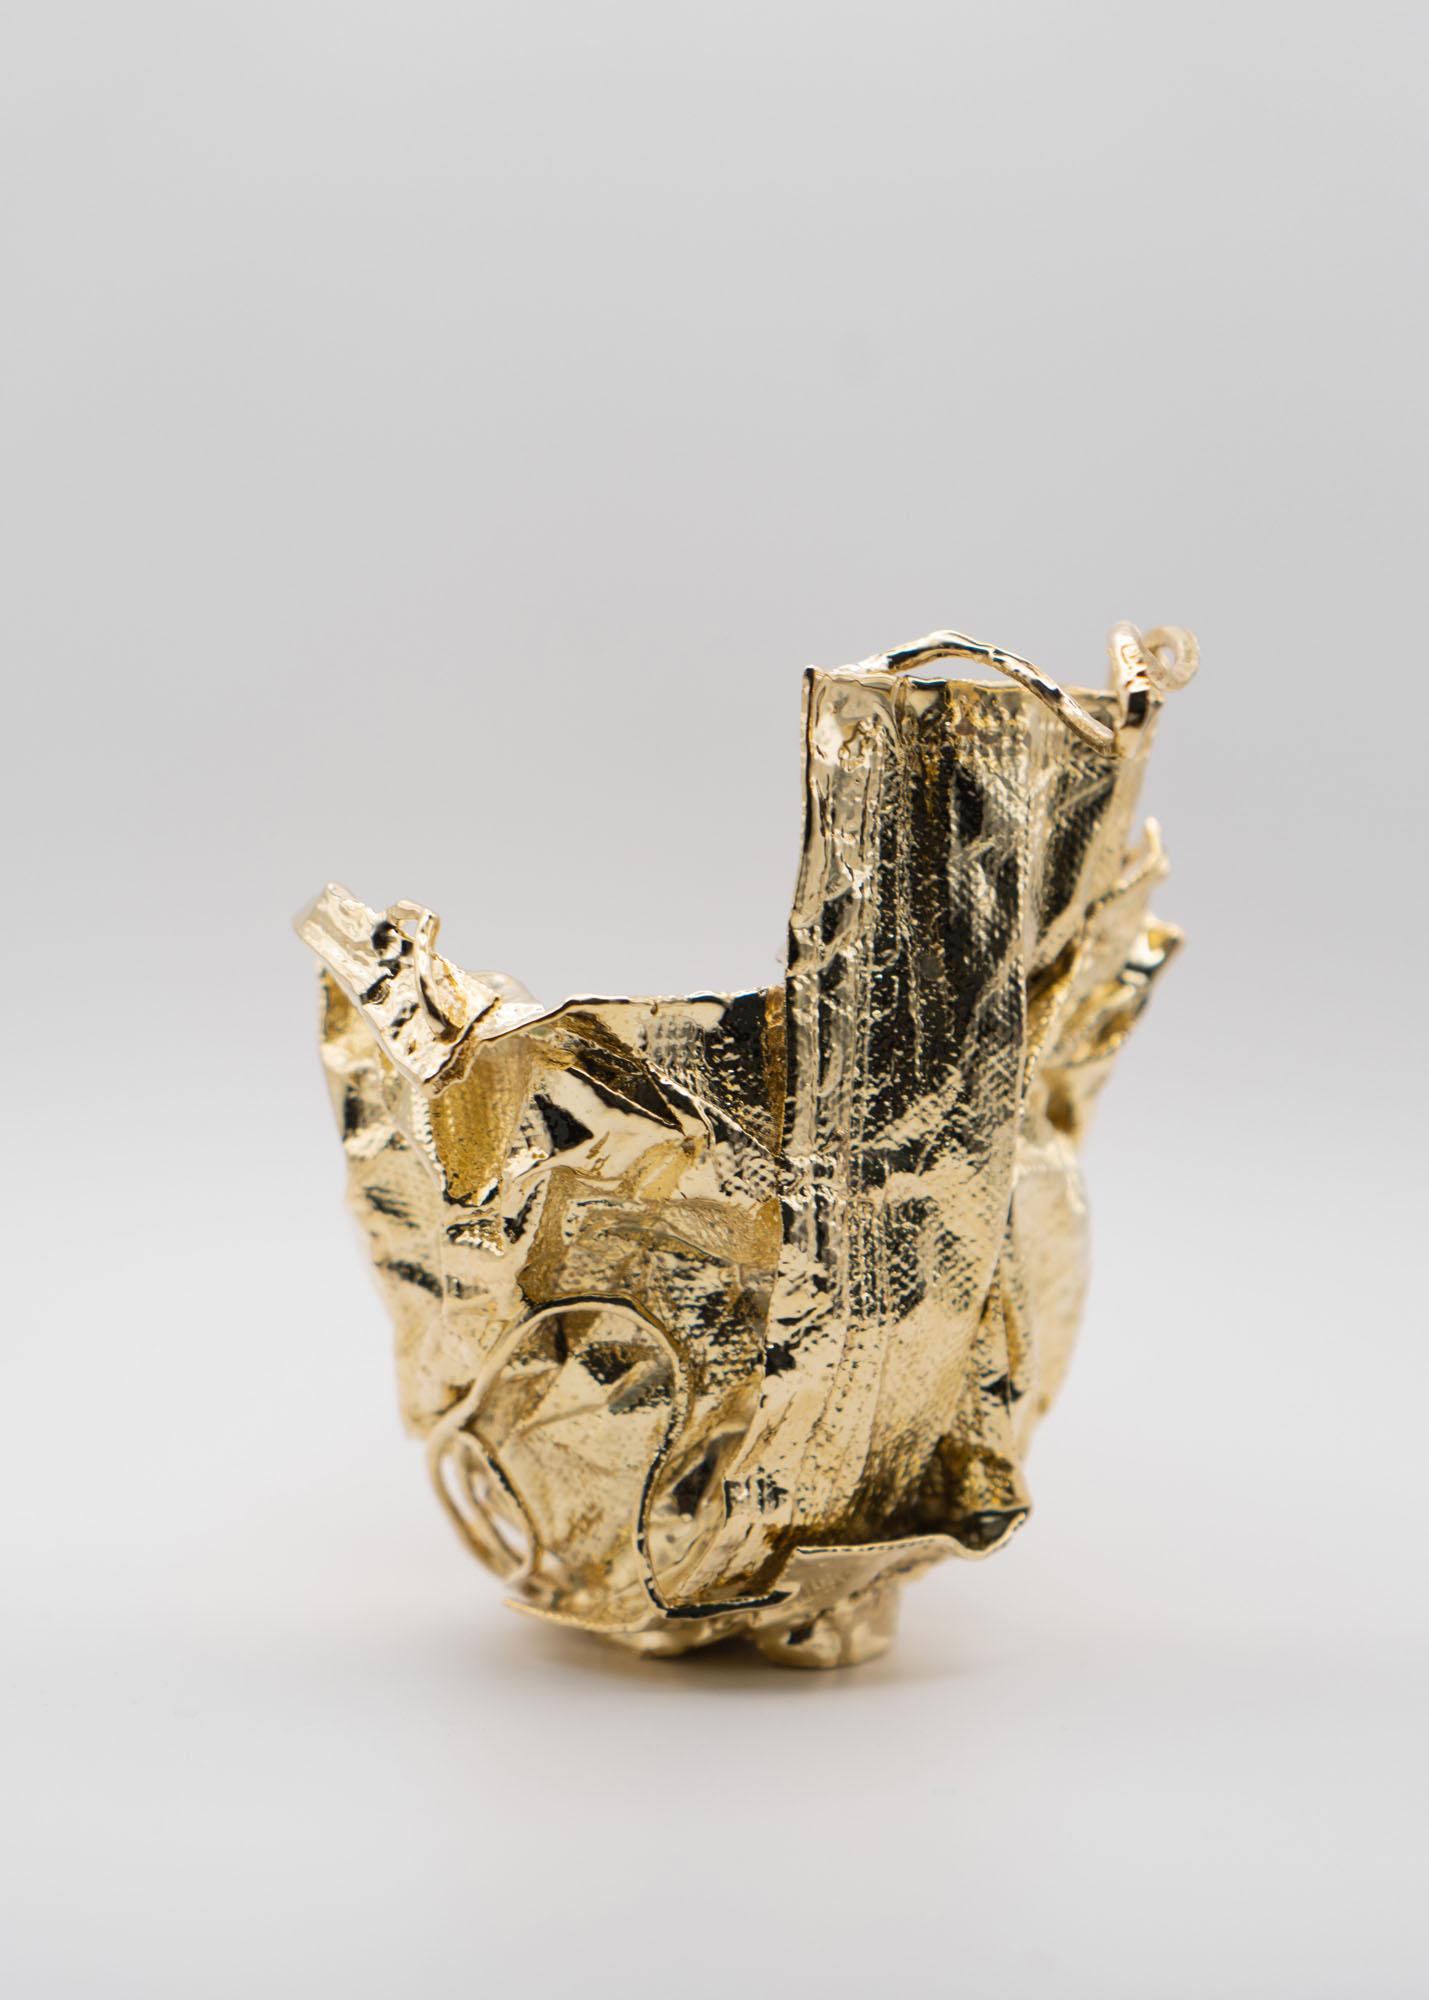 Galvanized Remask Act 014 Gold Art Object Made from Surgical Mask by Enrico Girotti For Sale